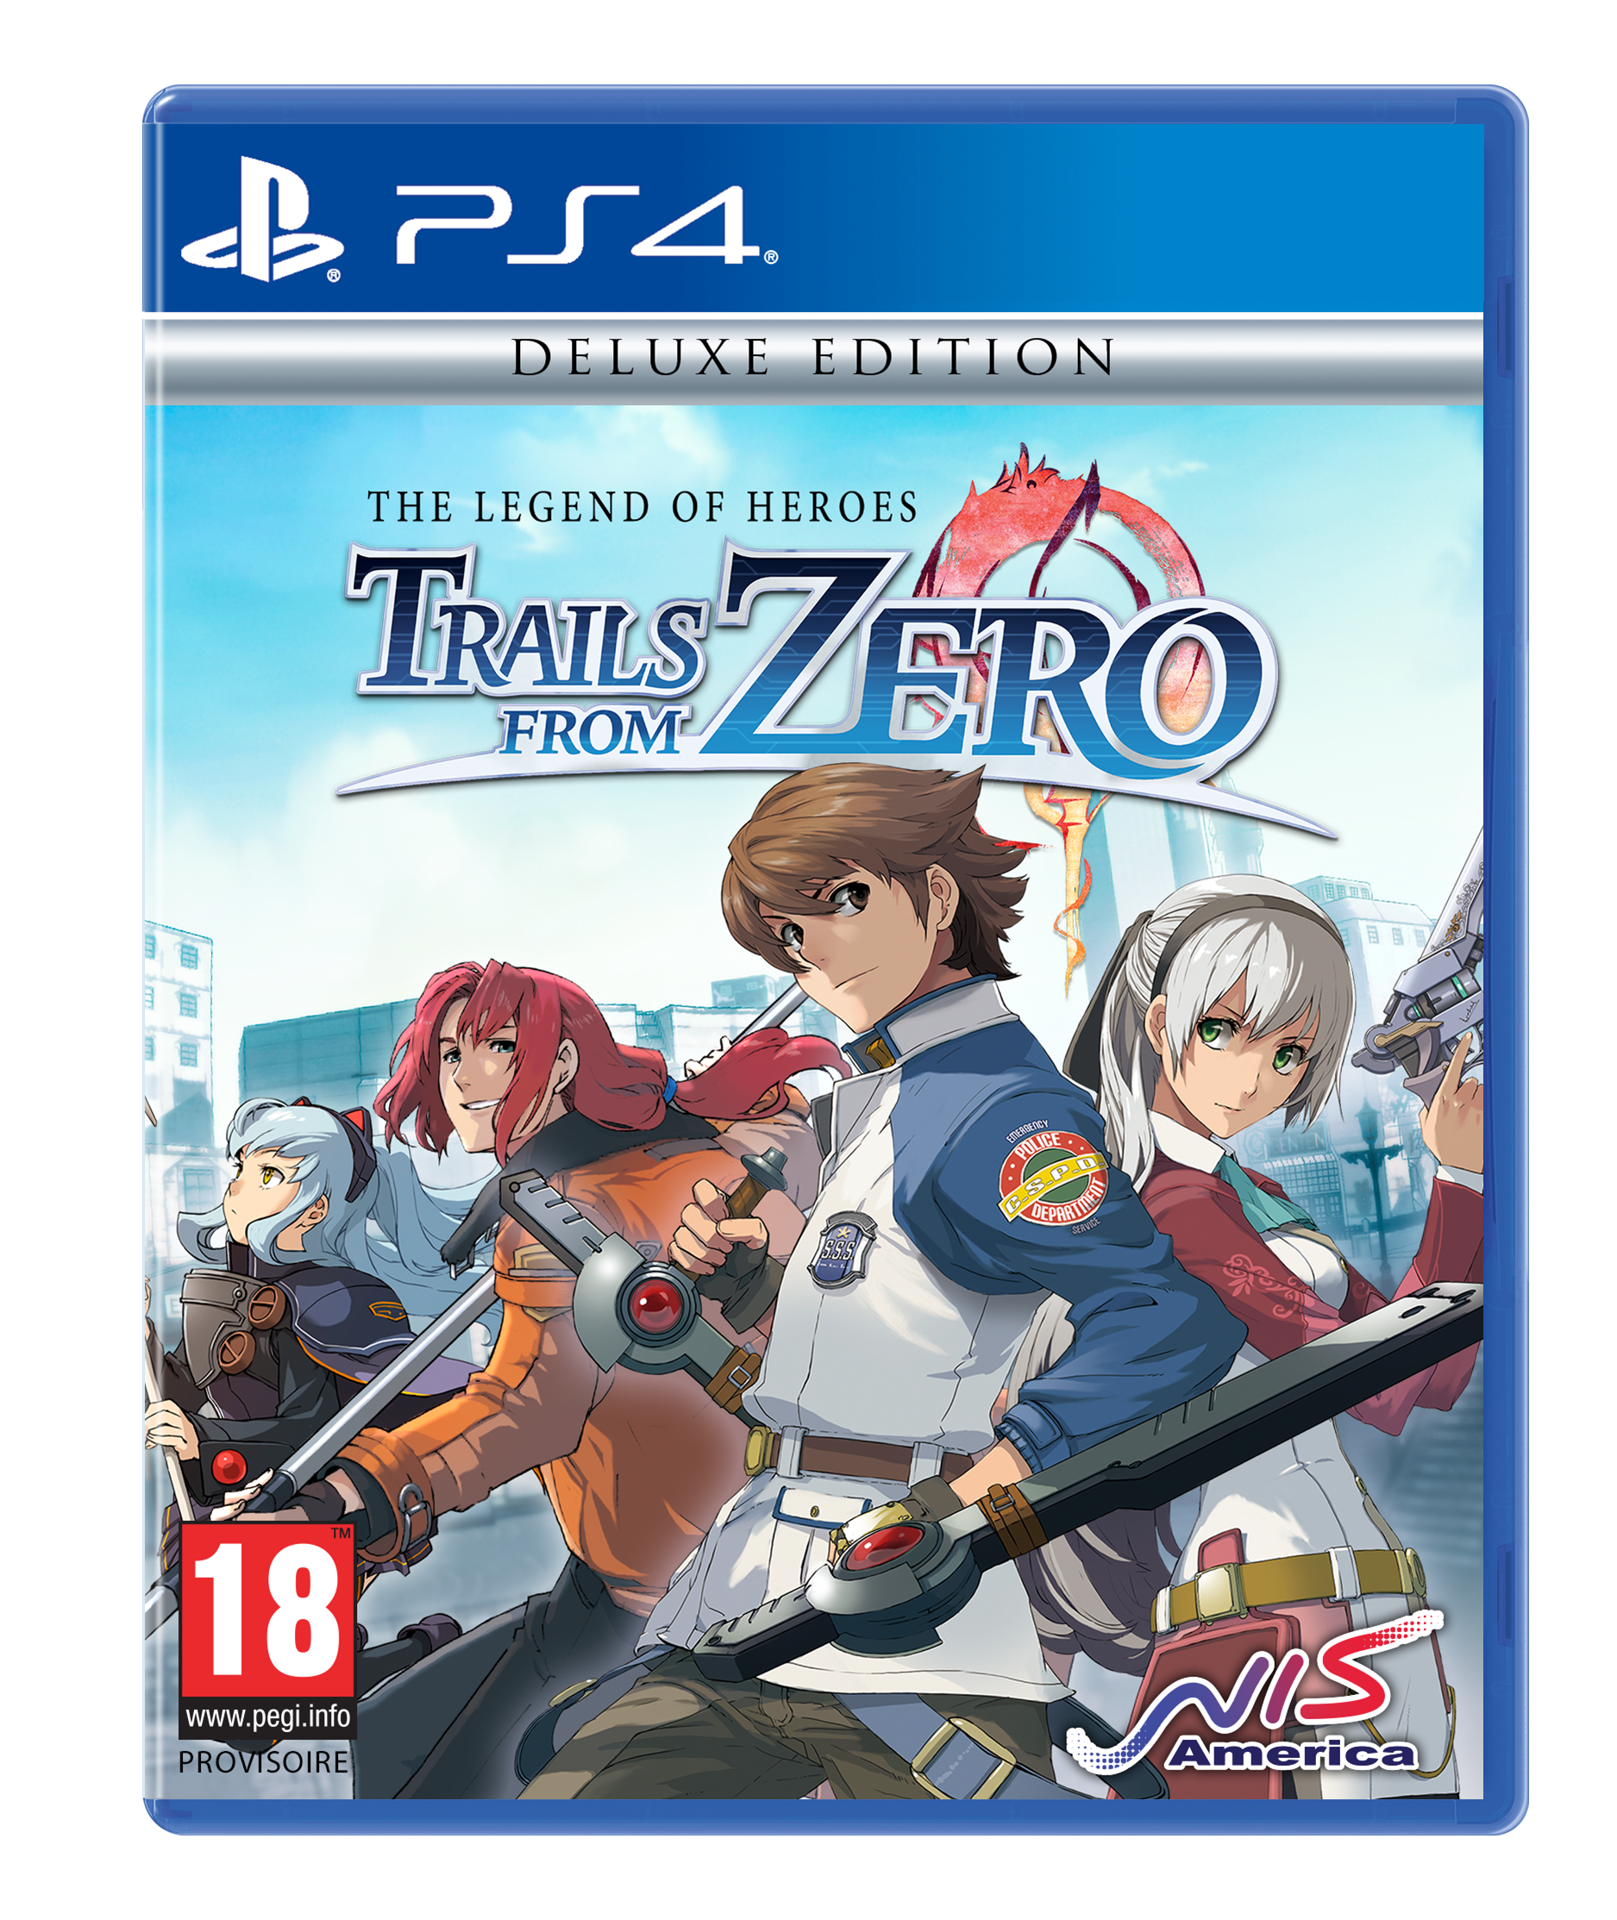 The Legend of Heroes : Trails from Zero Deluxe Edition